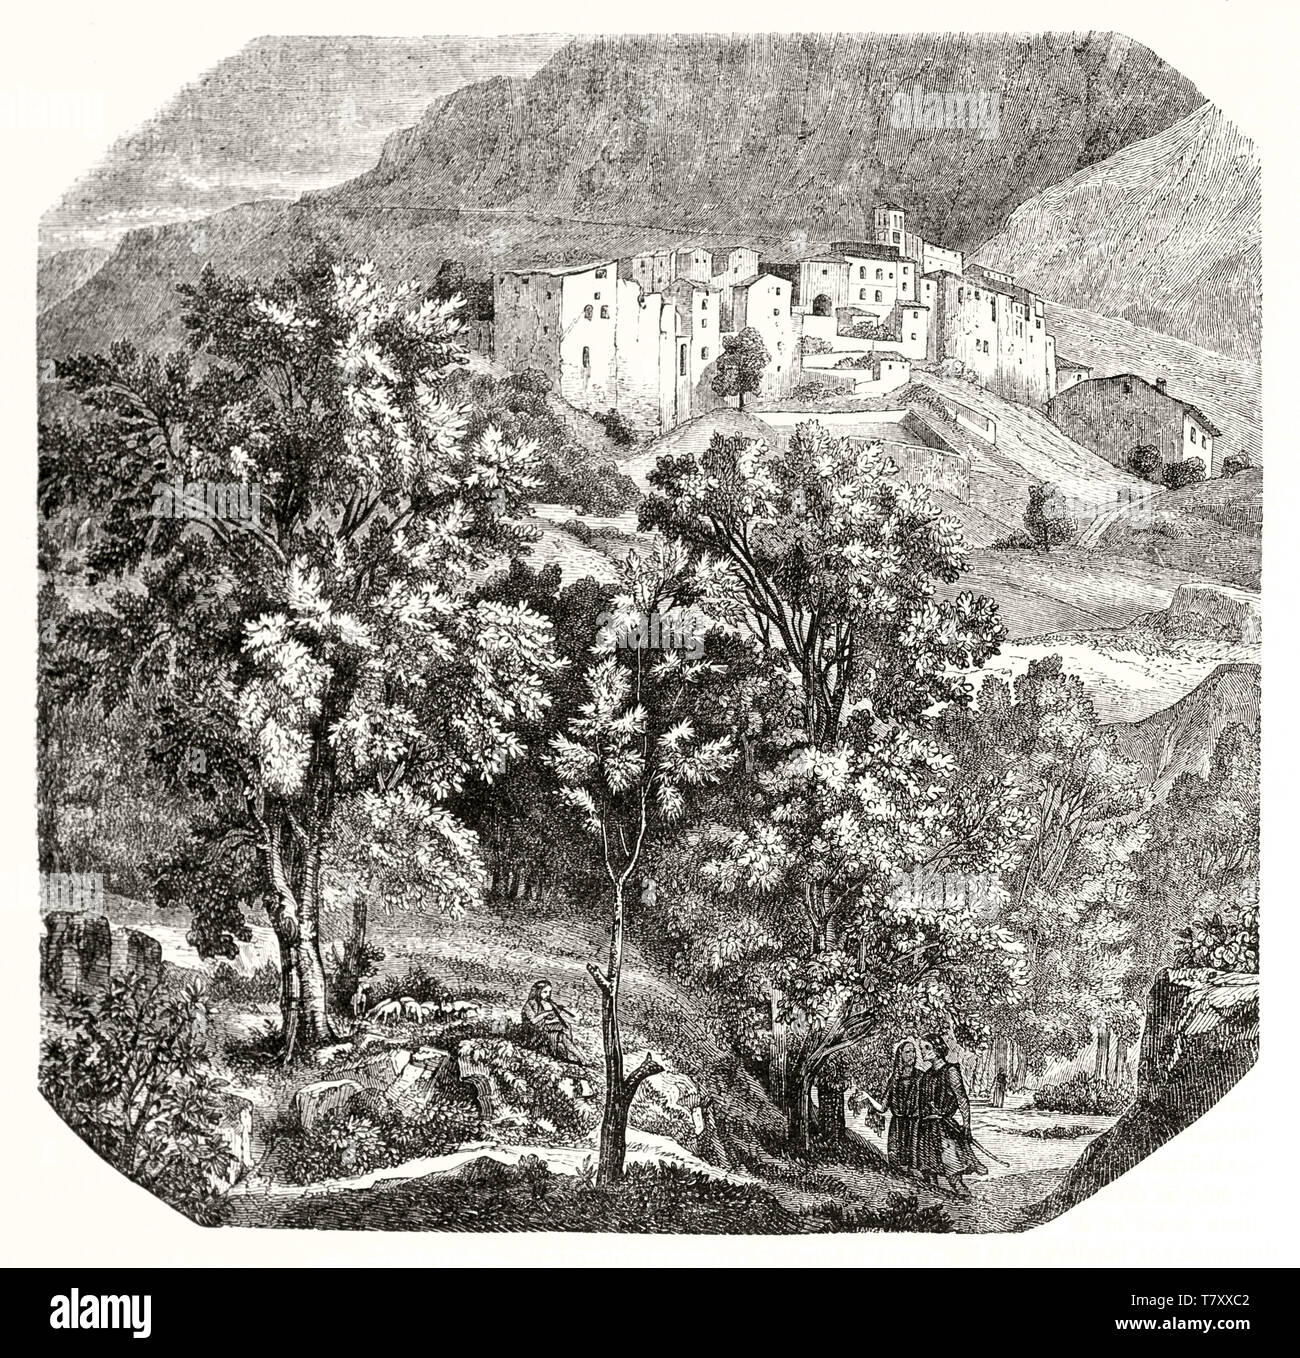 Ancient squared etching style illustration. Old view of Papigno, little stone medieval village on top of a hill surroundedby the nature, Italy. By Bellel publ. on Magasin Pittoresque Paris 1848 Stock Photo